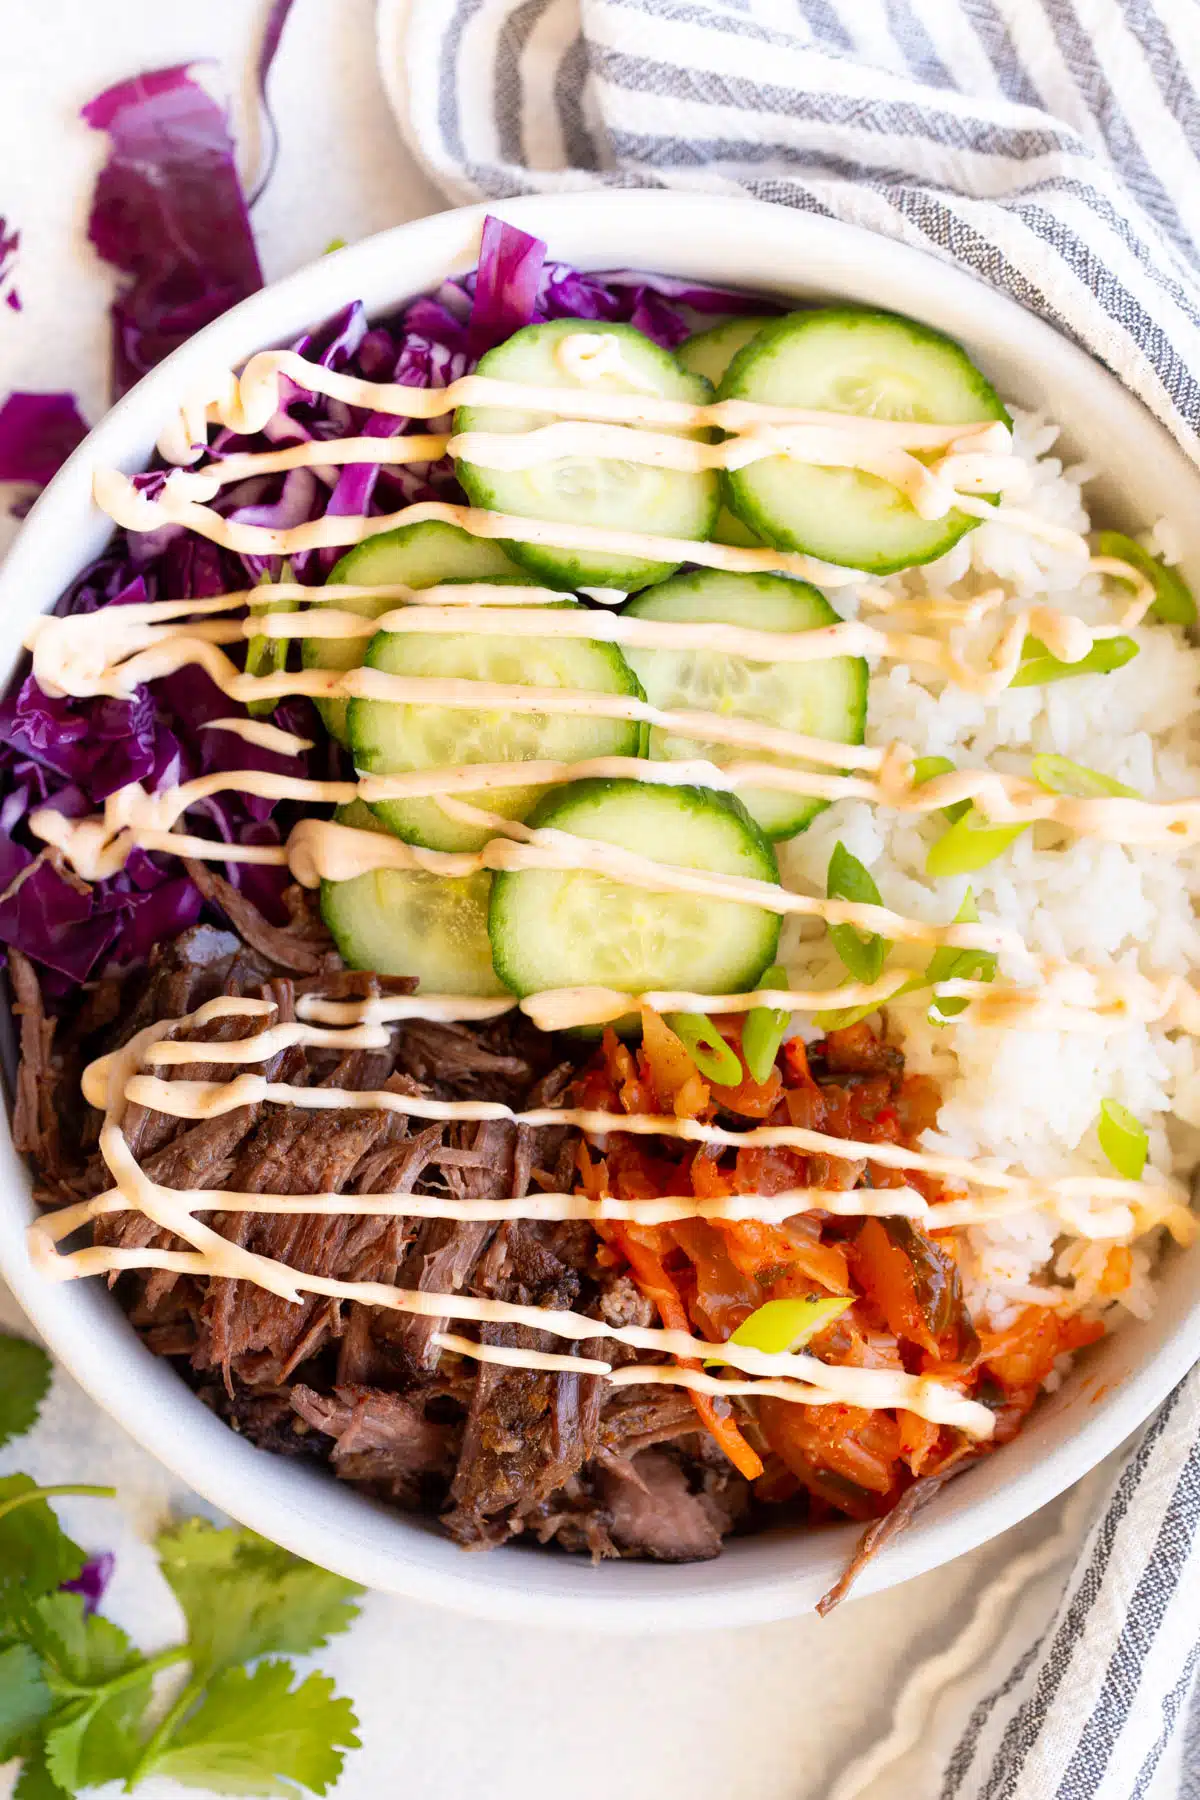 Slow Cooker Korean Beef Burrito Bowls in a shallow white bowl with a blue and white striped towel wrapped around it and some cabbage and cilantro on the gray background.